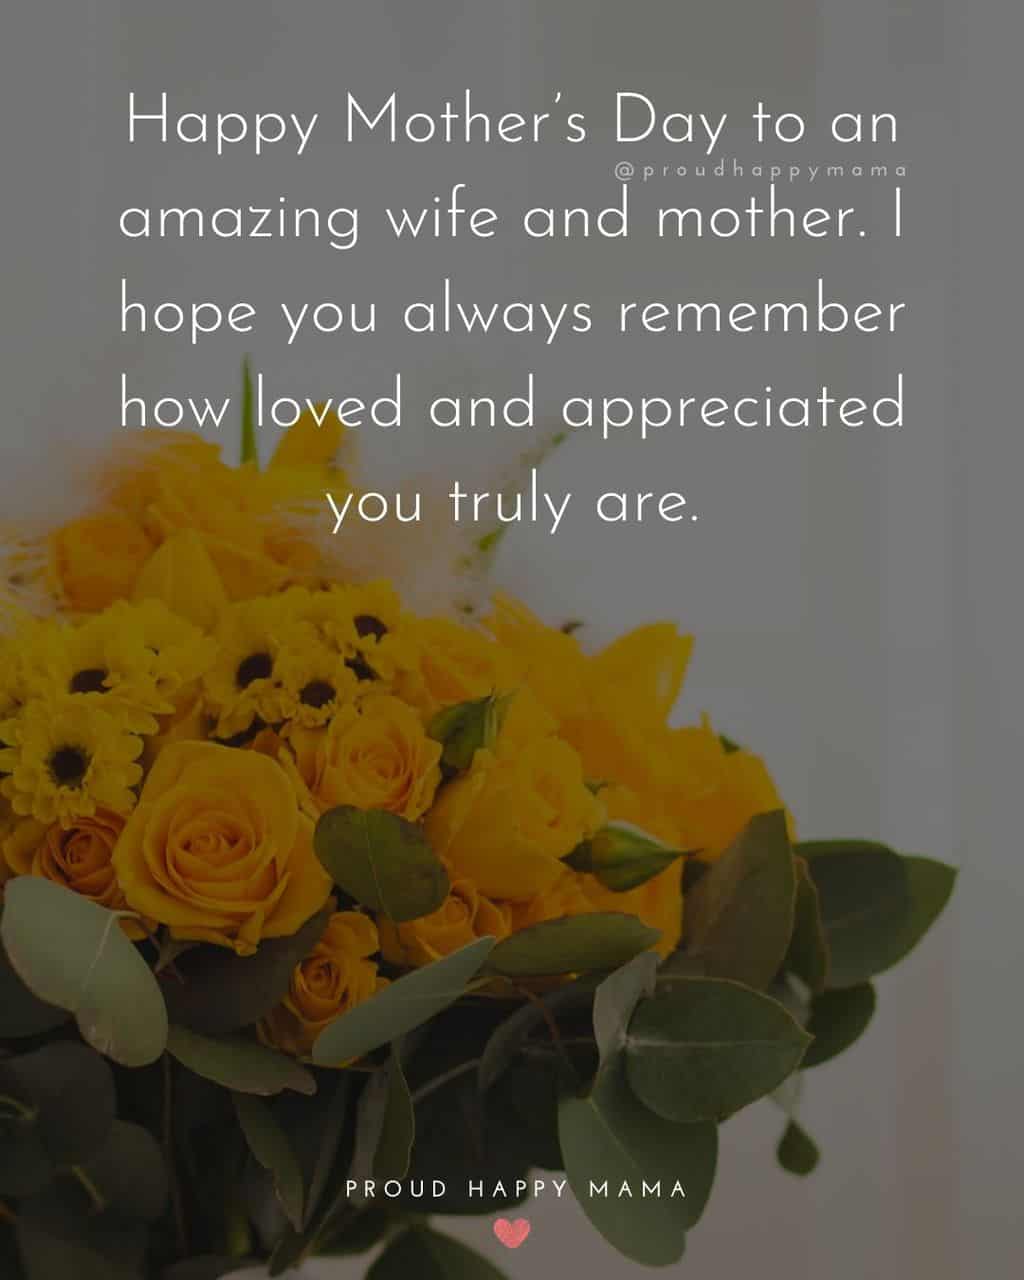 Happy Mothers Day Quotes For Wife - Happy Mother’s Day to an amazing wife and mother. I hope you always remember how